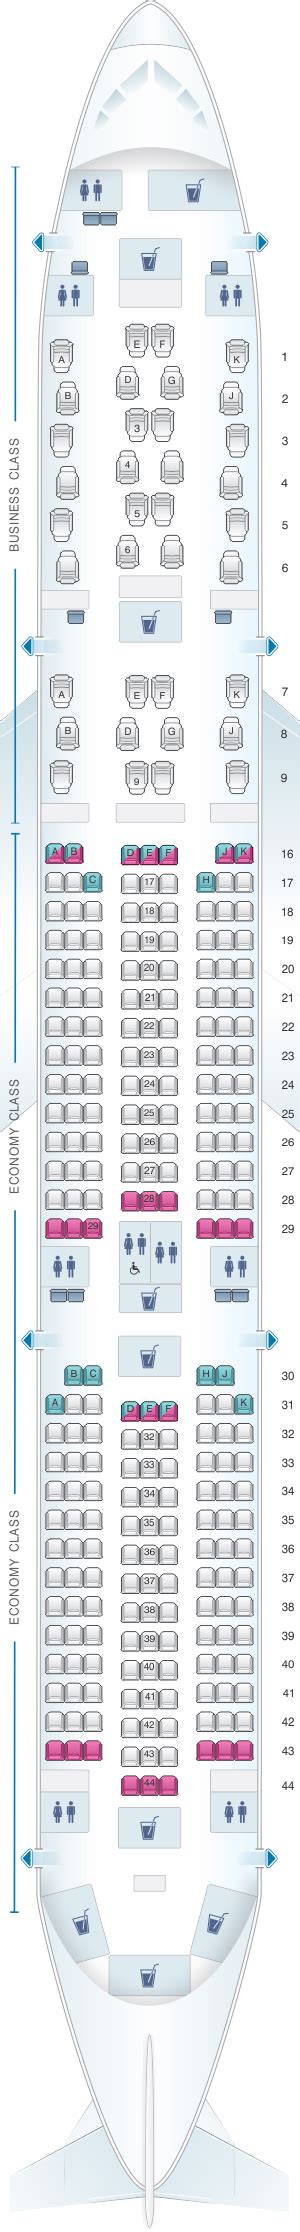 35 Airbus A350 900 Seat Map Qatar Images Airbus Way